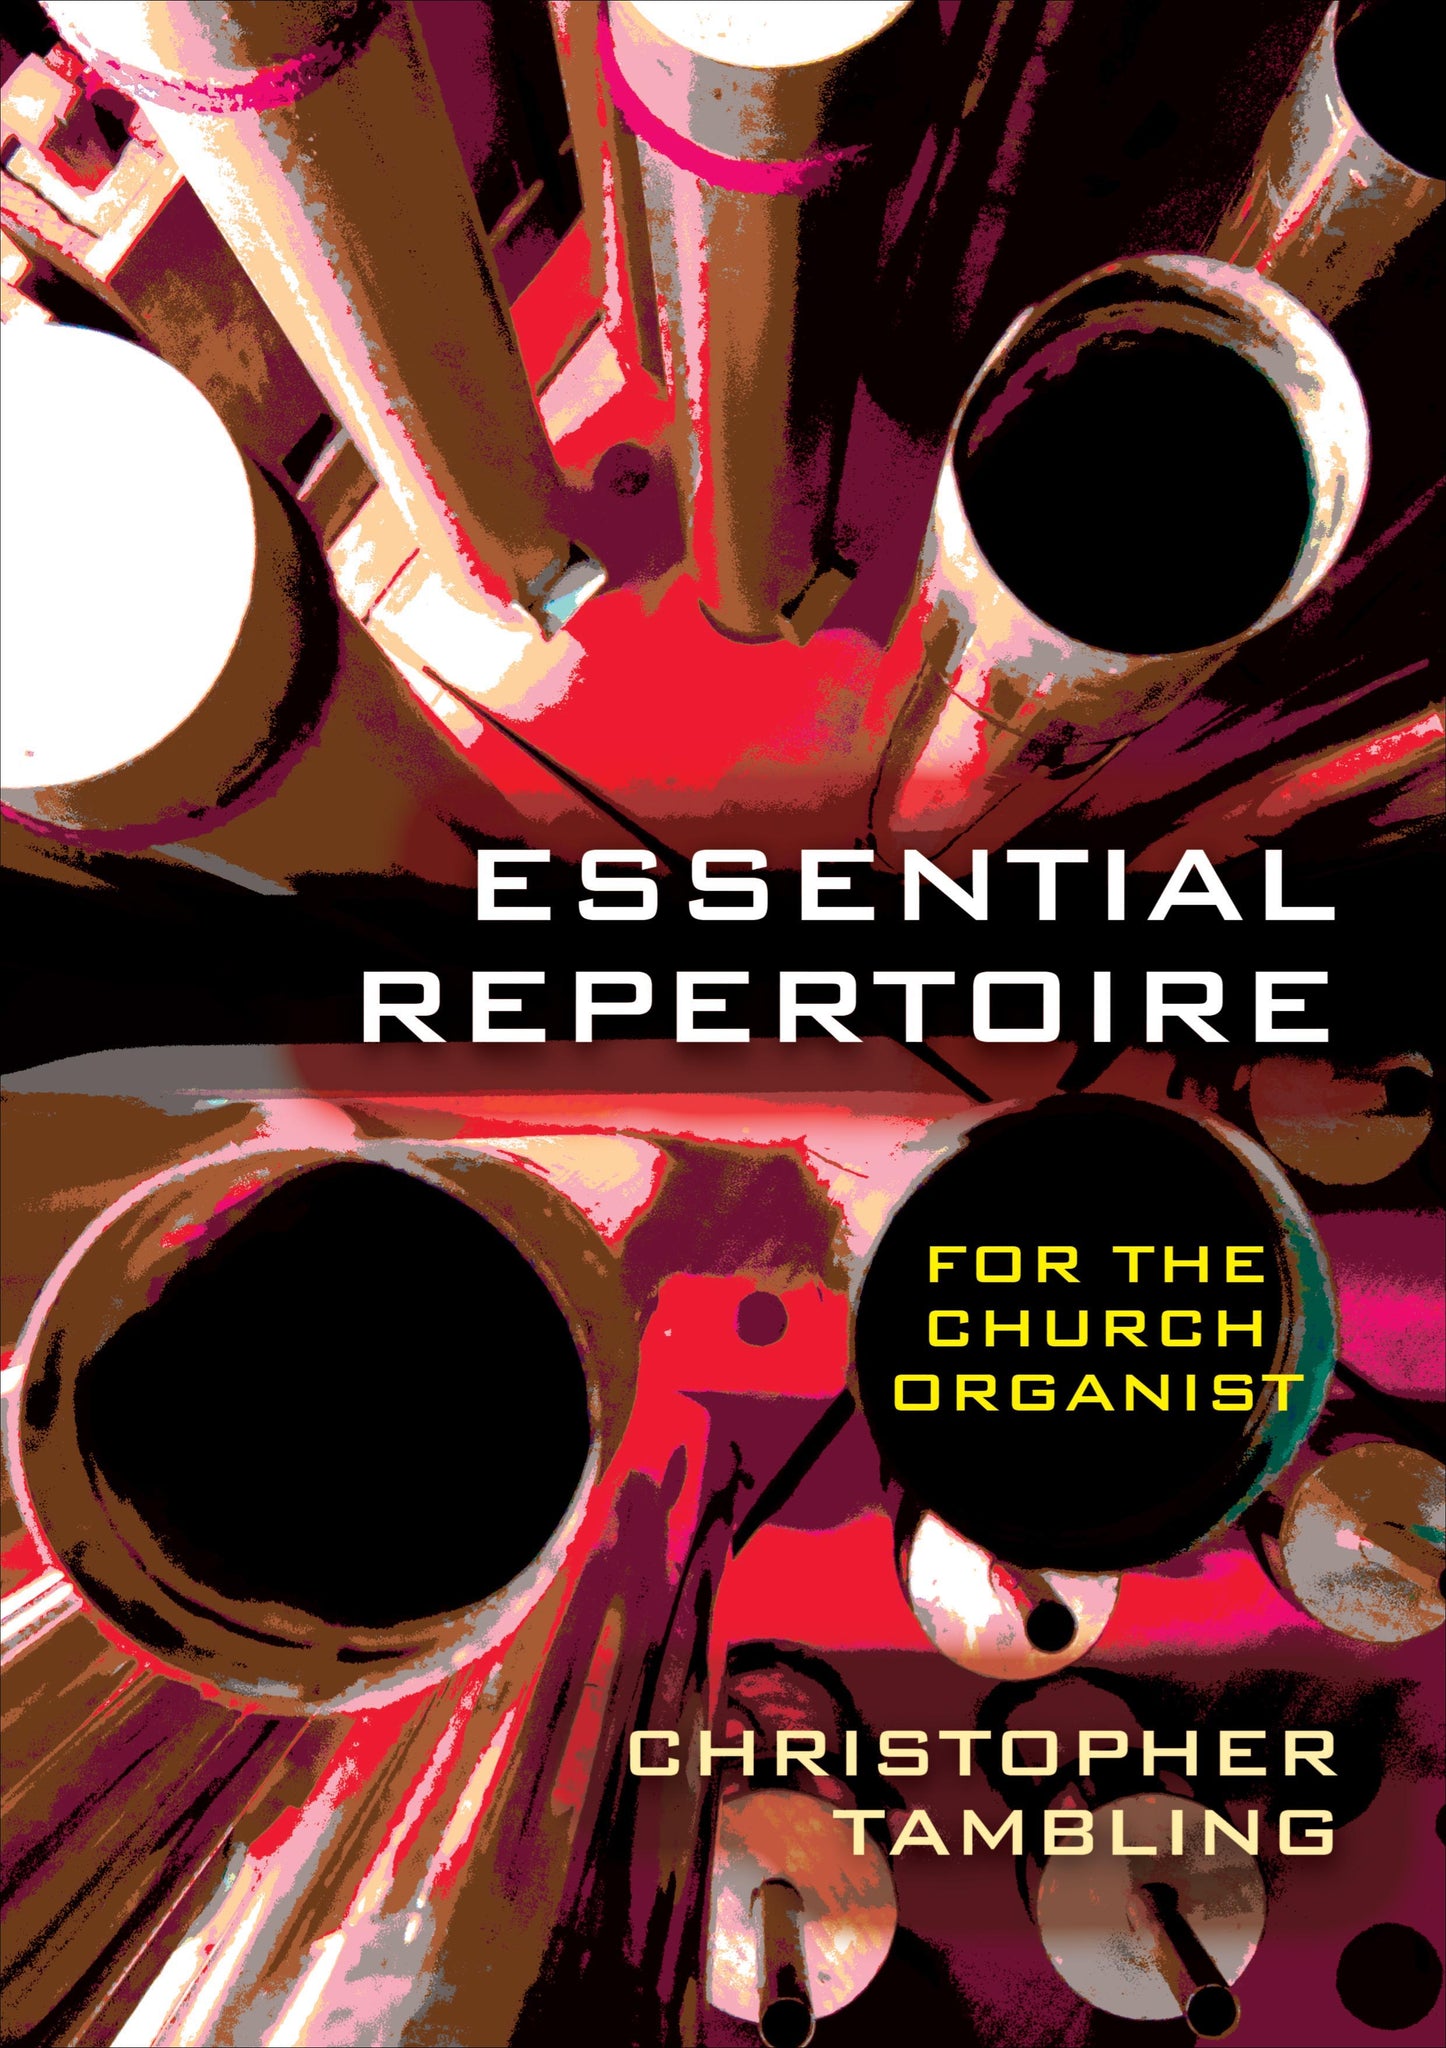 Essential Repertoire For The Church OrganistEssential Repertoire For The Church Organist